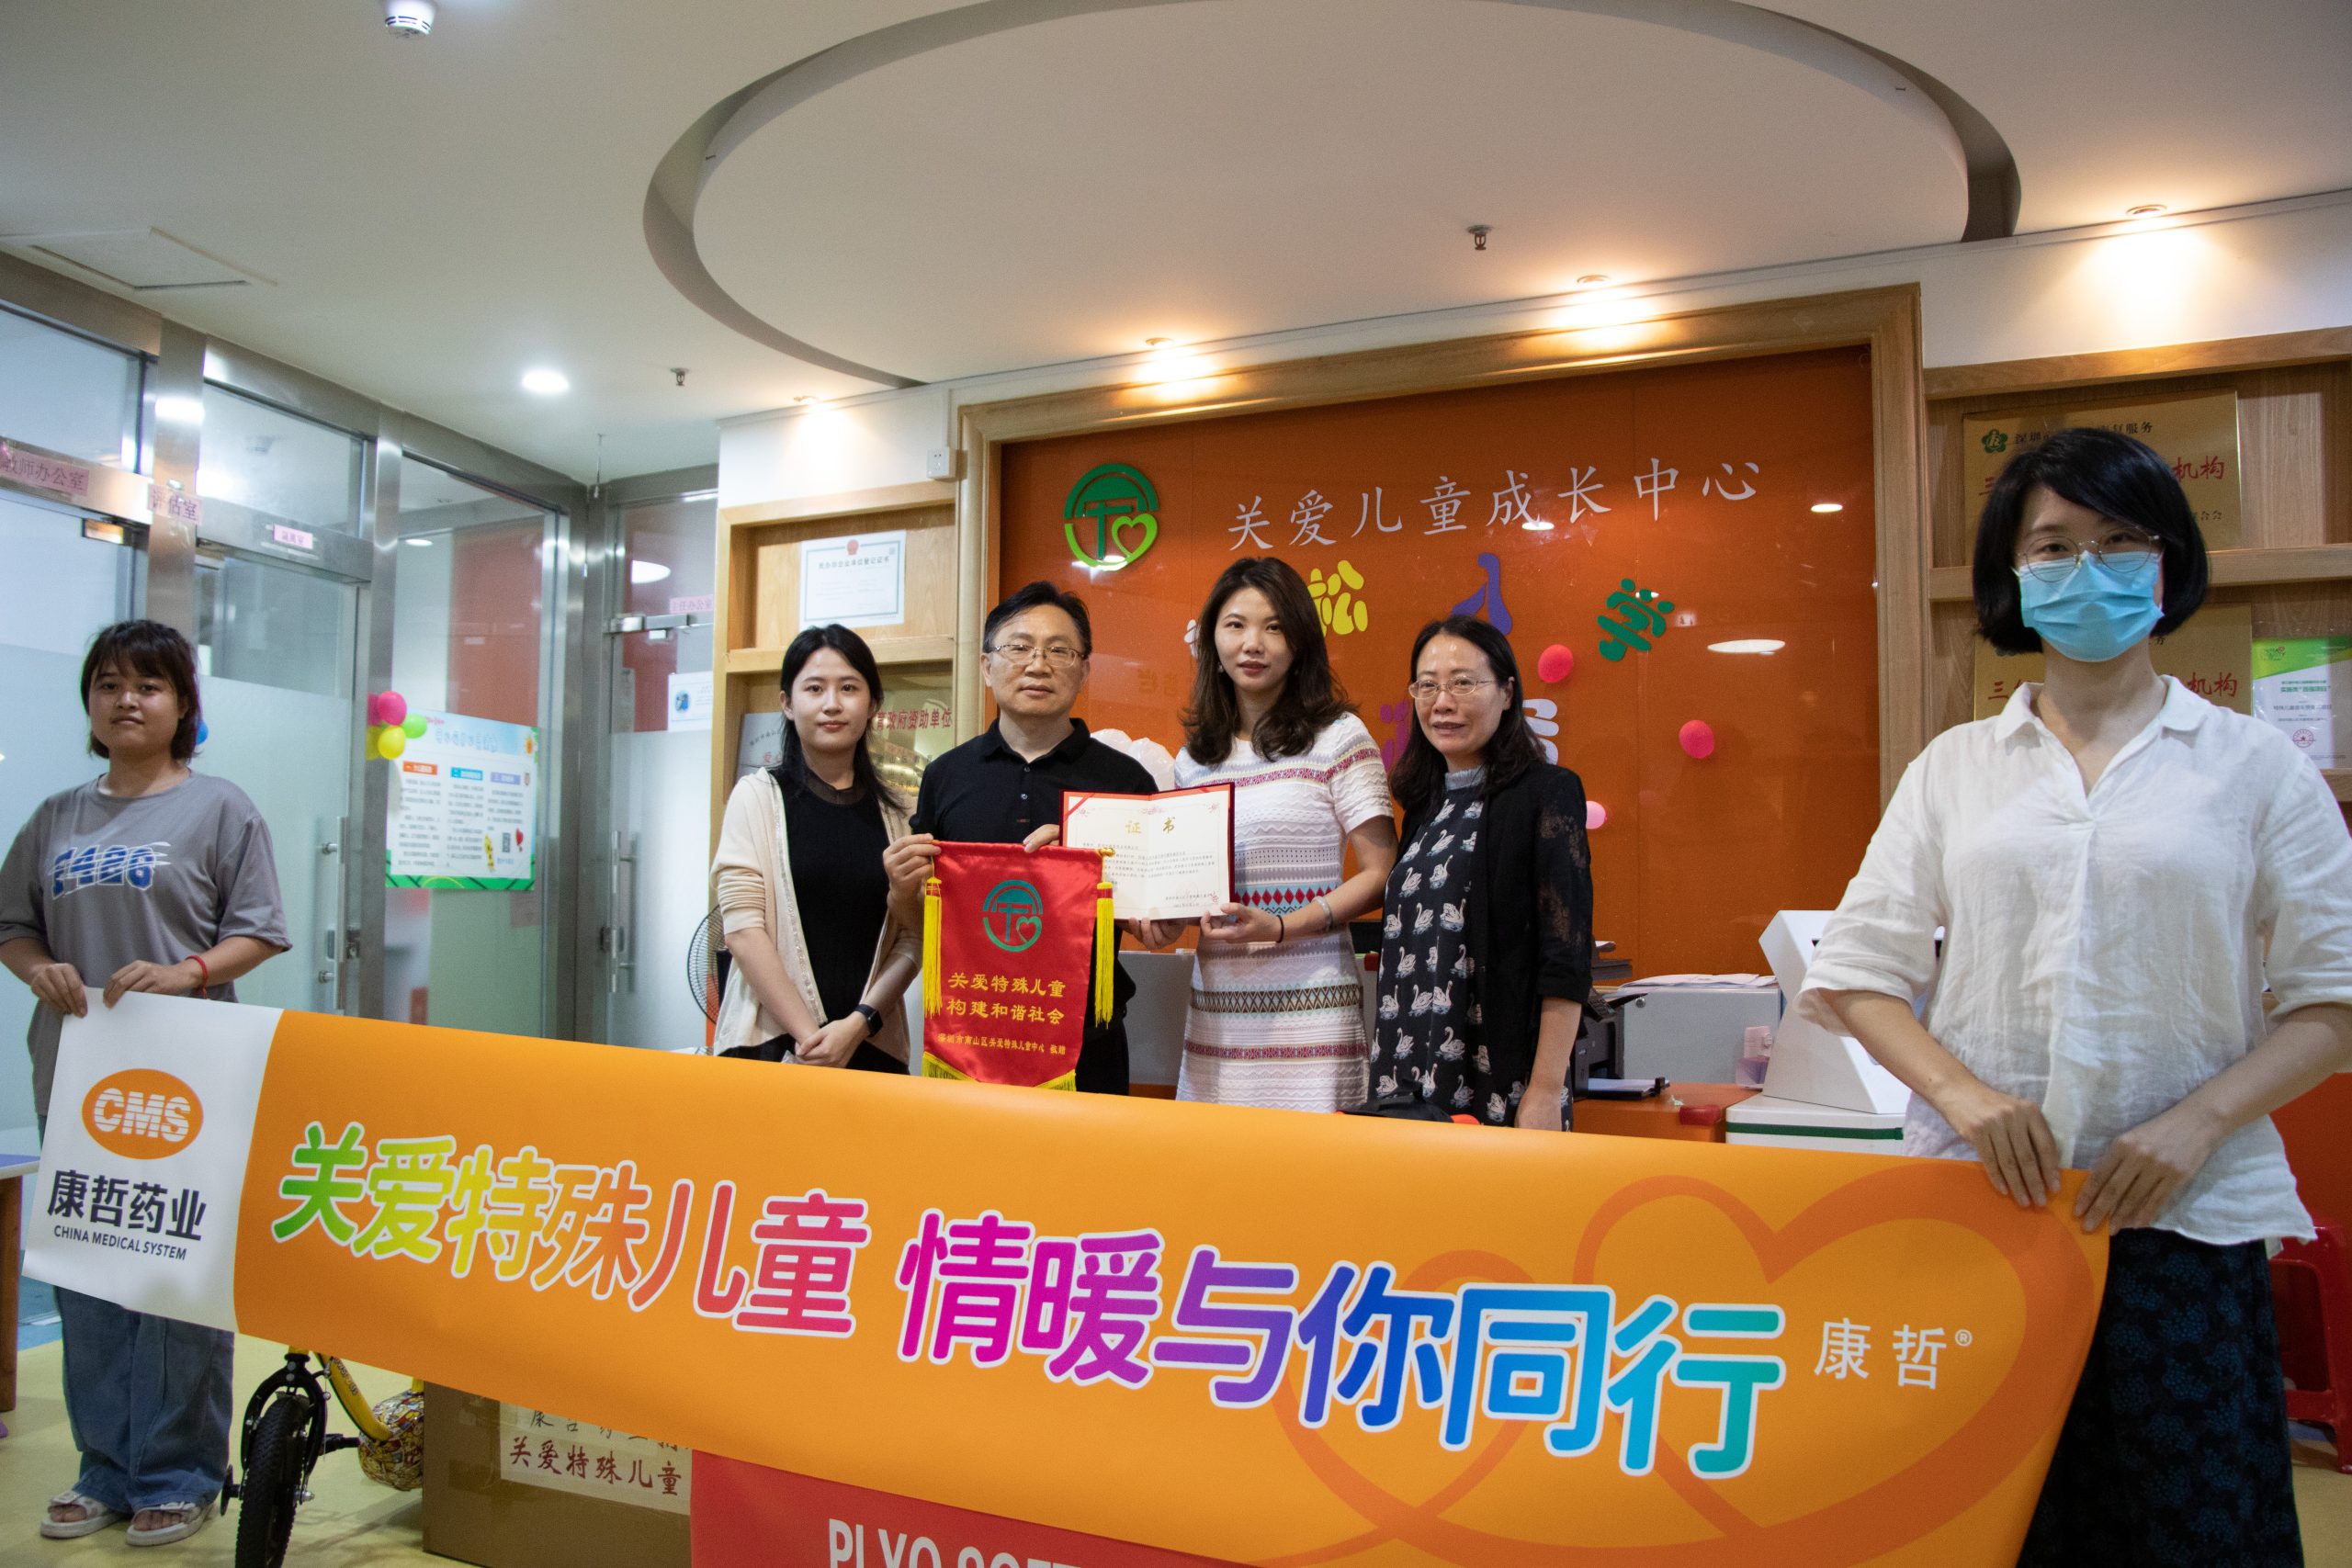 Together with Love | China Medical System Donates to Care for Exceptional Children